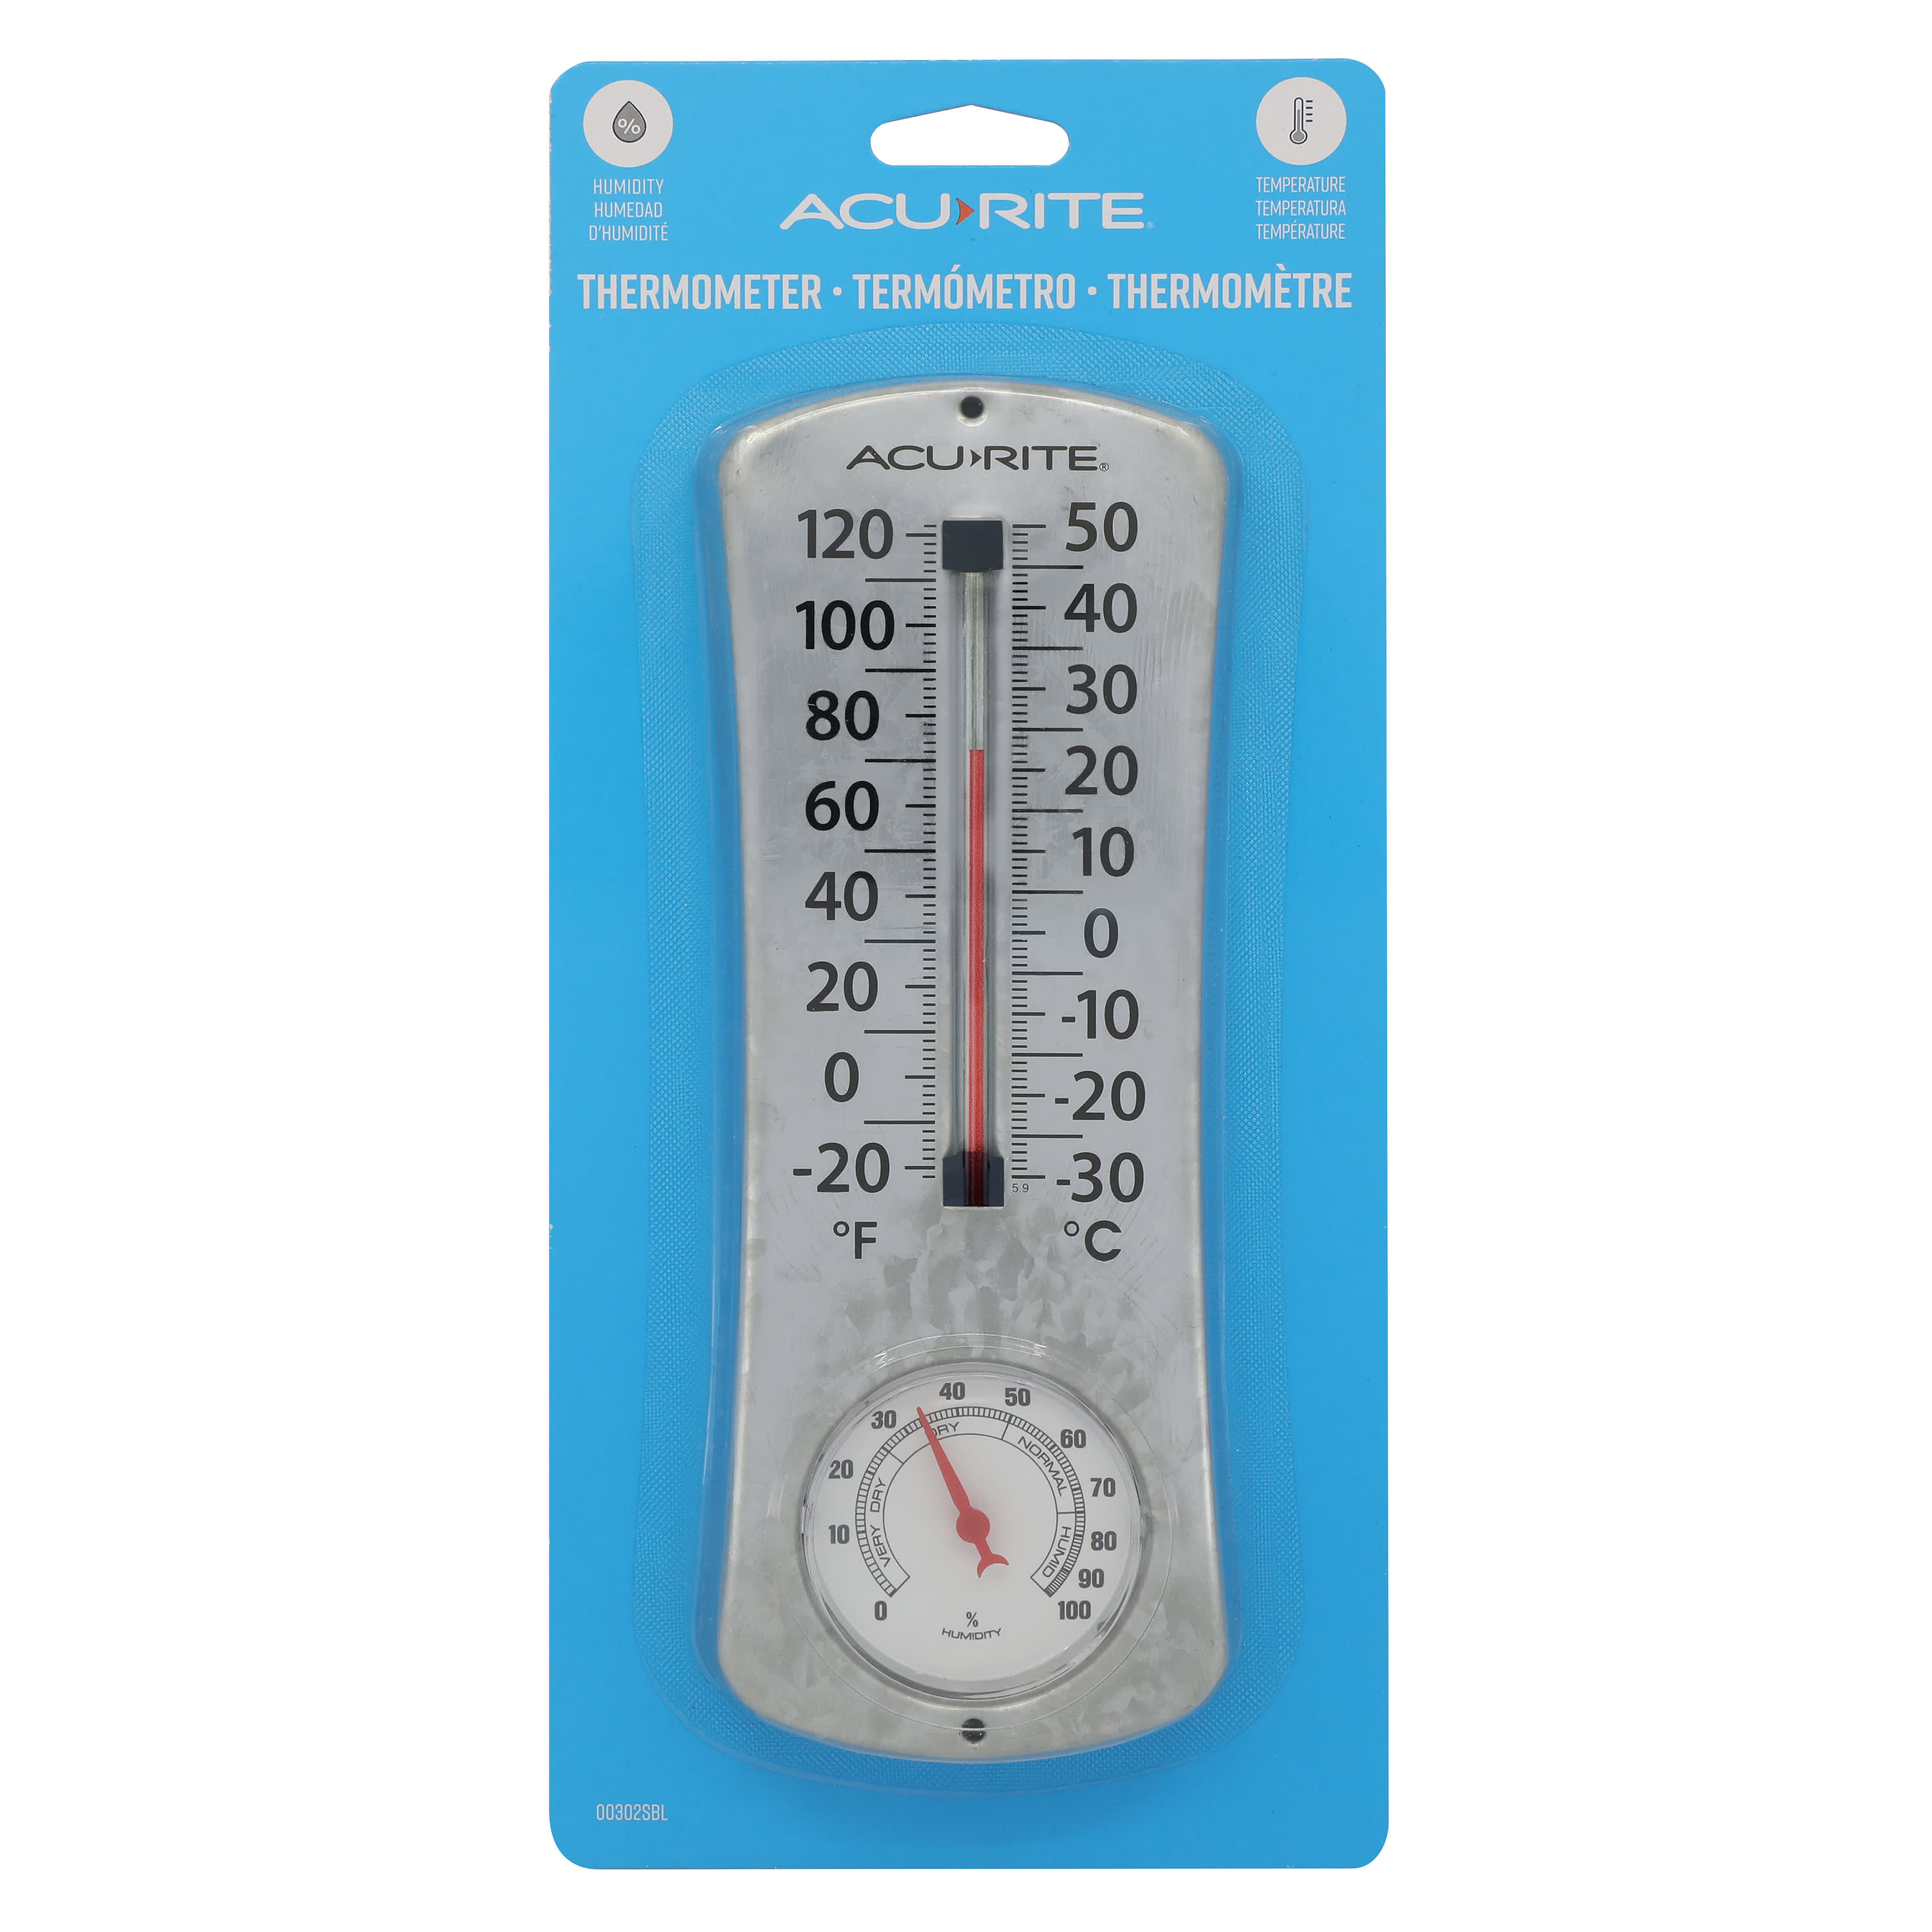 AcuRite® 8.5-Inch Galvanized Thermometer/Hygrometer for Indoor or Outdoor Temperature and Humidity